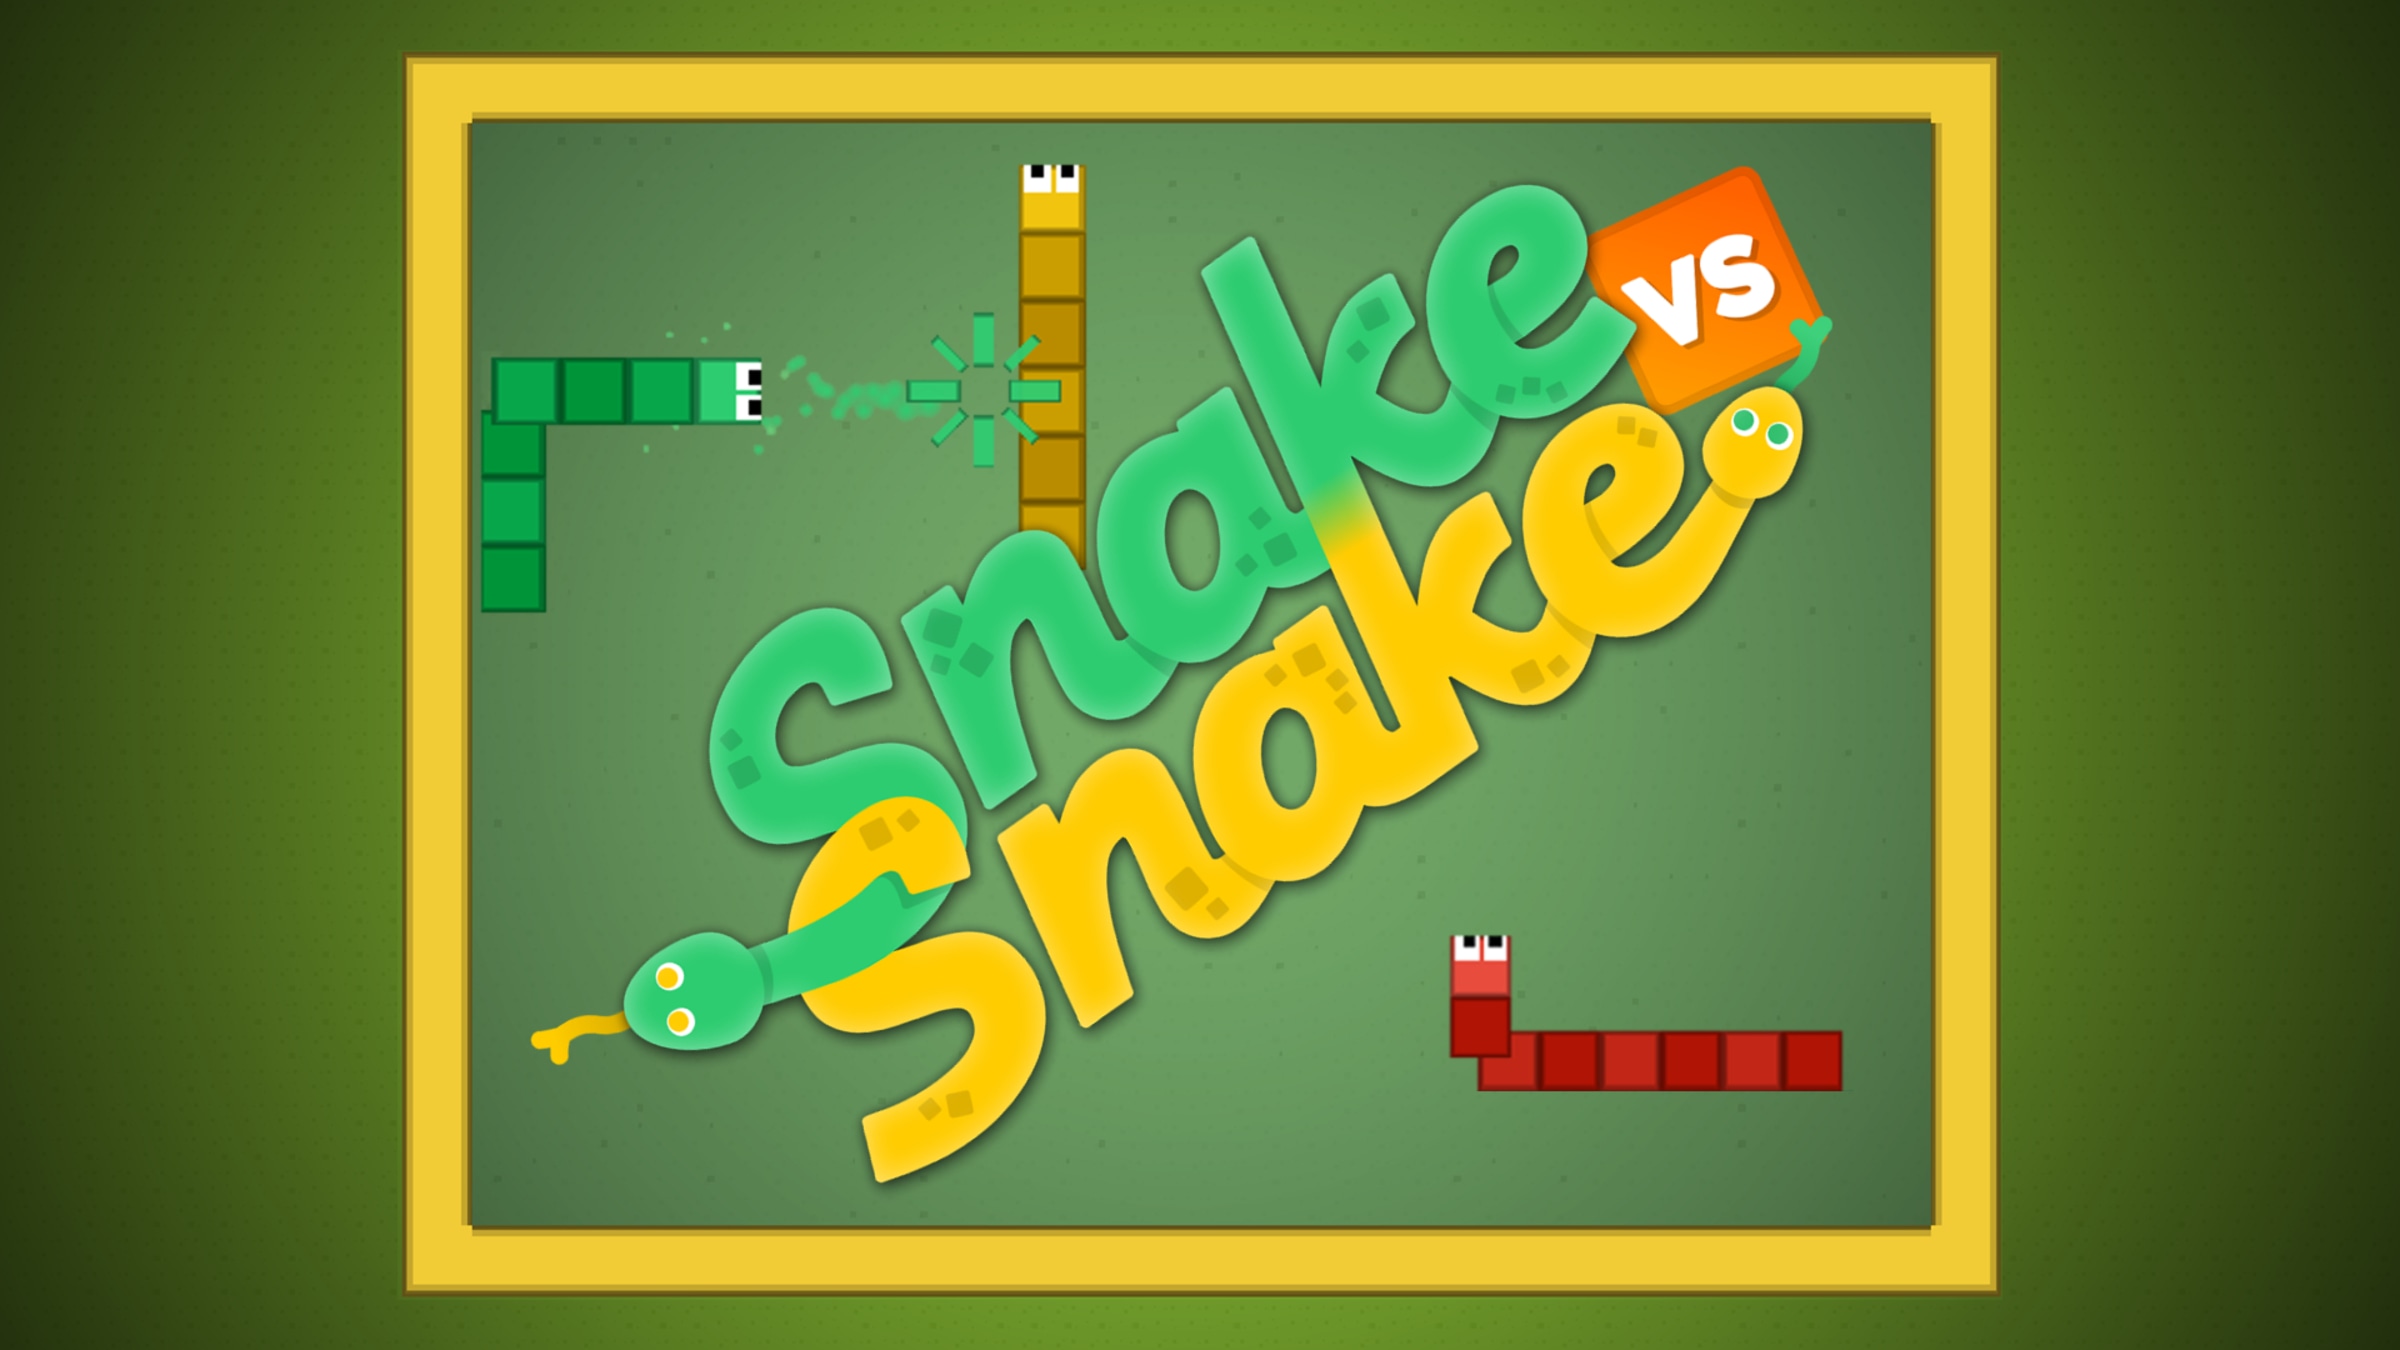 Beating the Snake Game!! Easy Strategy!! Small Map: 5x Apples